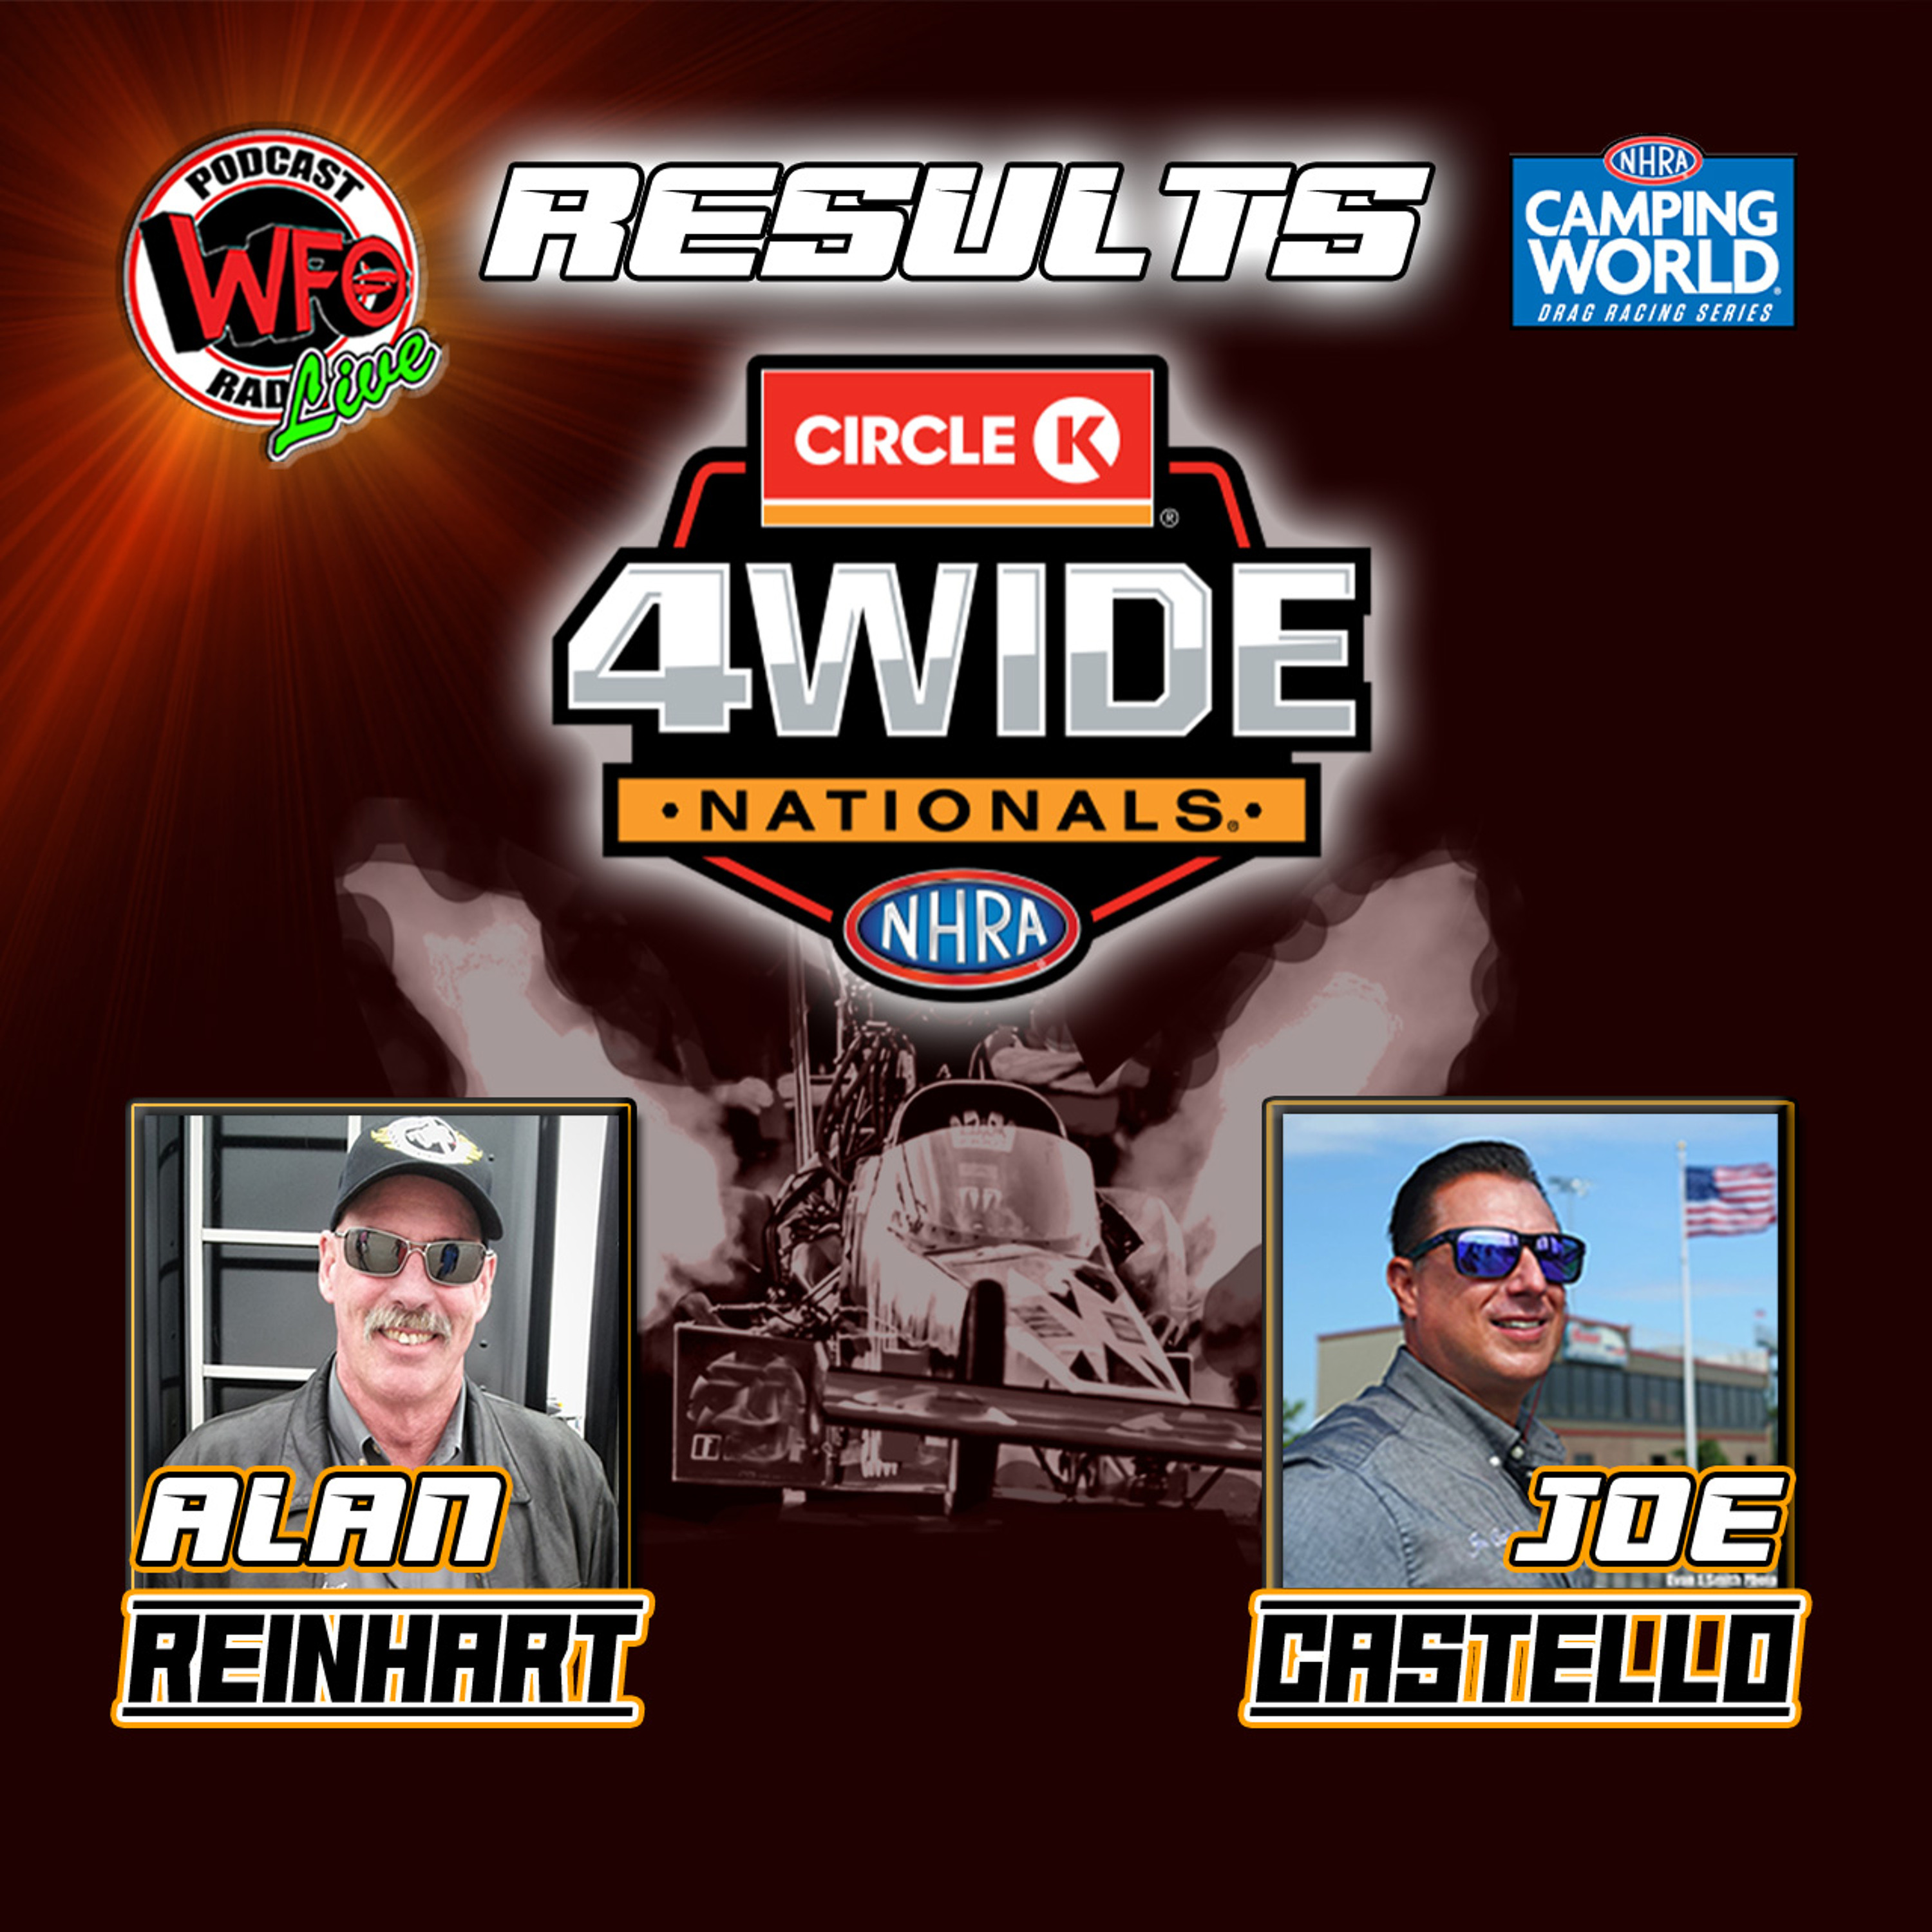 Circle K 4-Wide NHRA Nationals results with Alan Reinhart and Joe Castello 5/3/2022